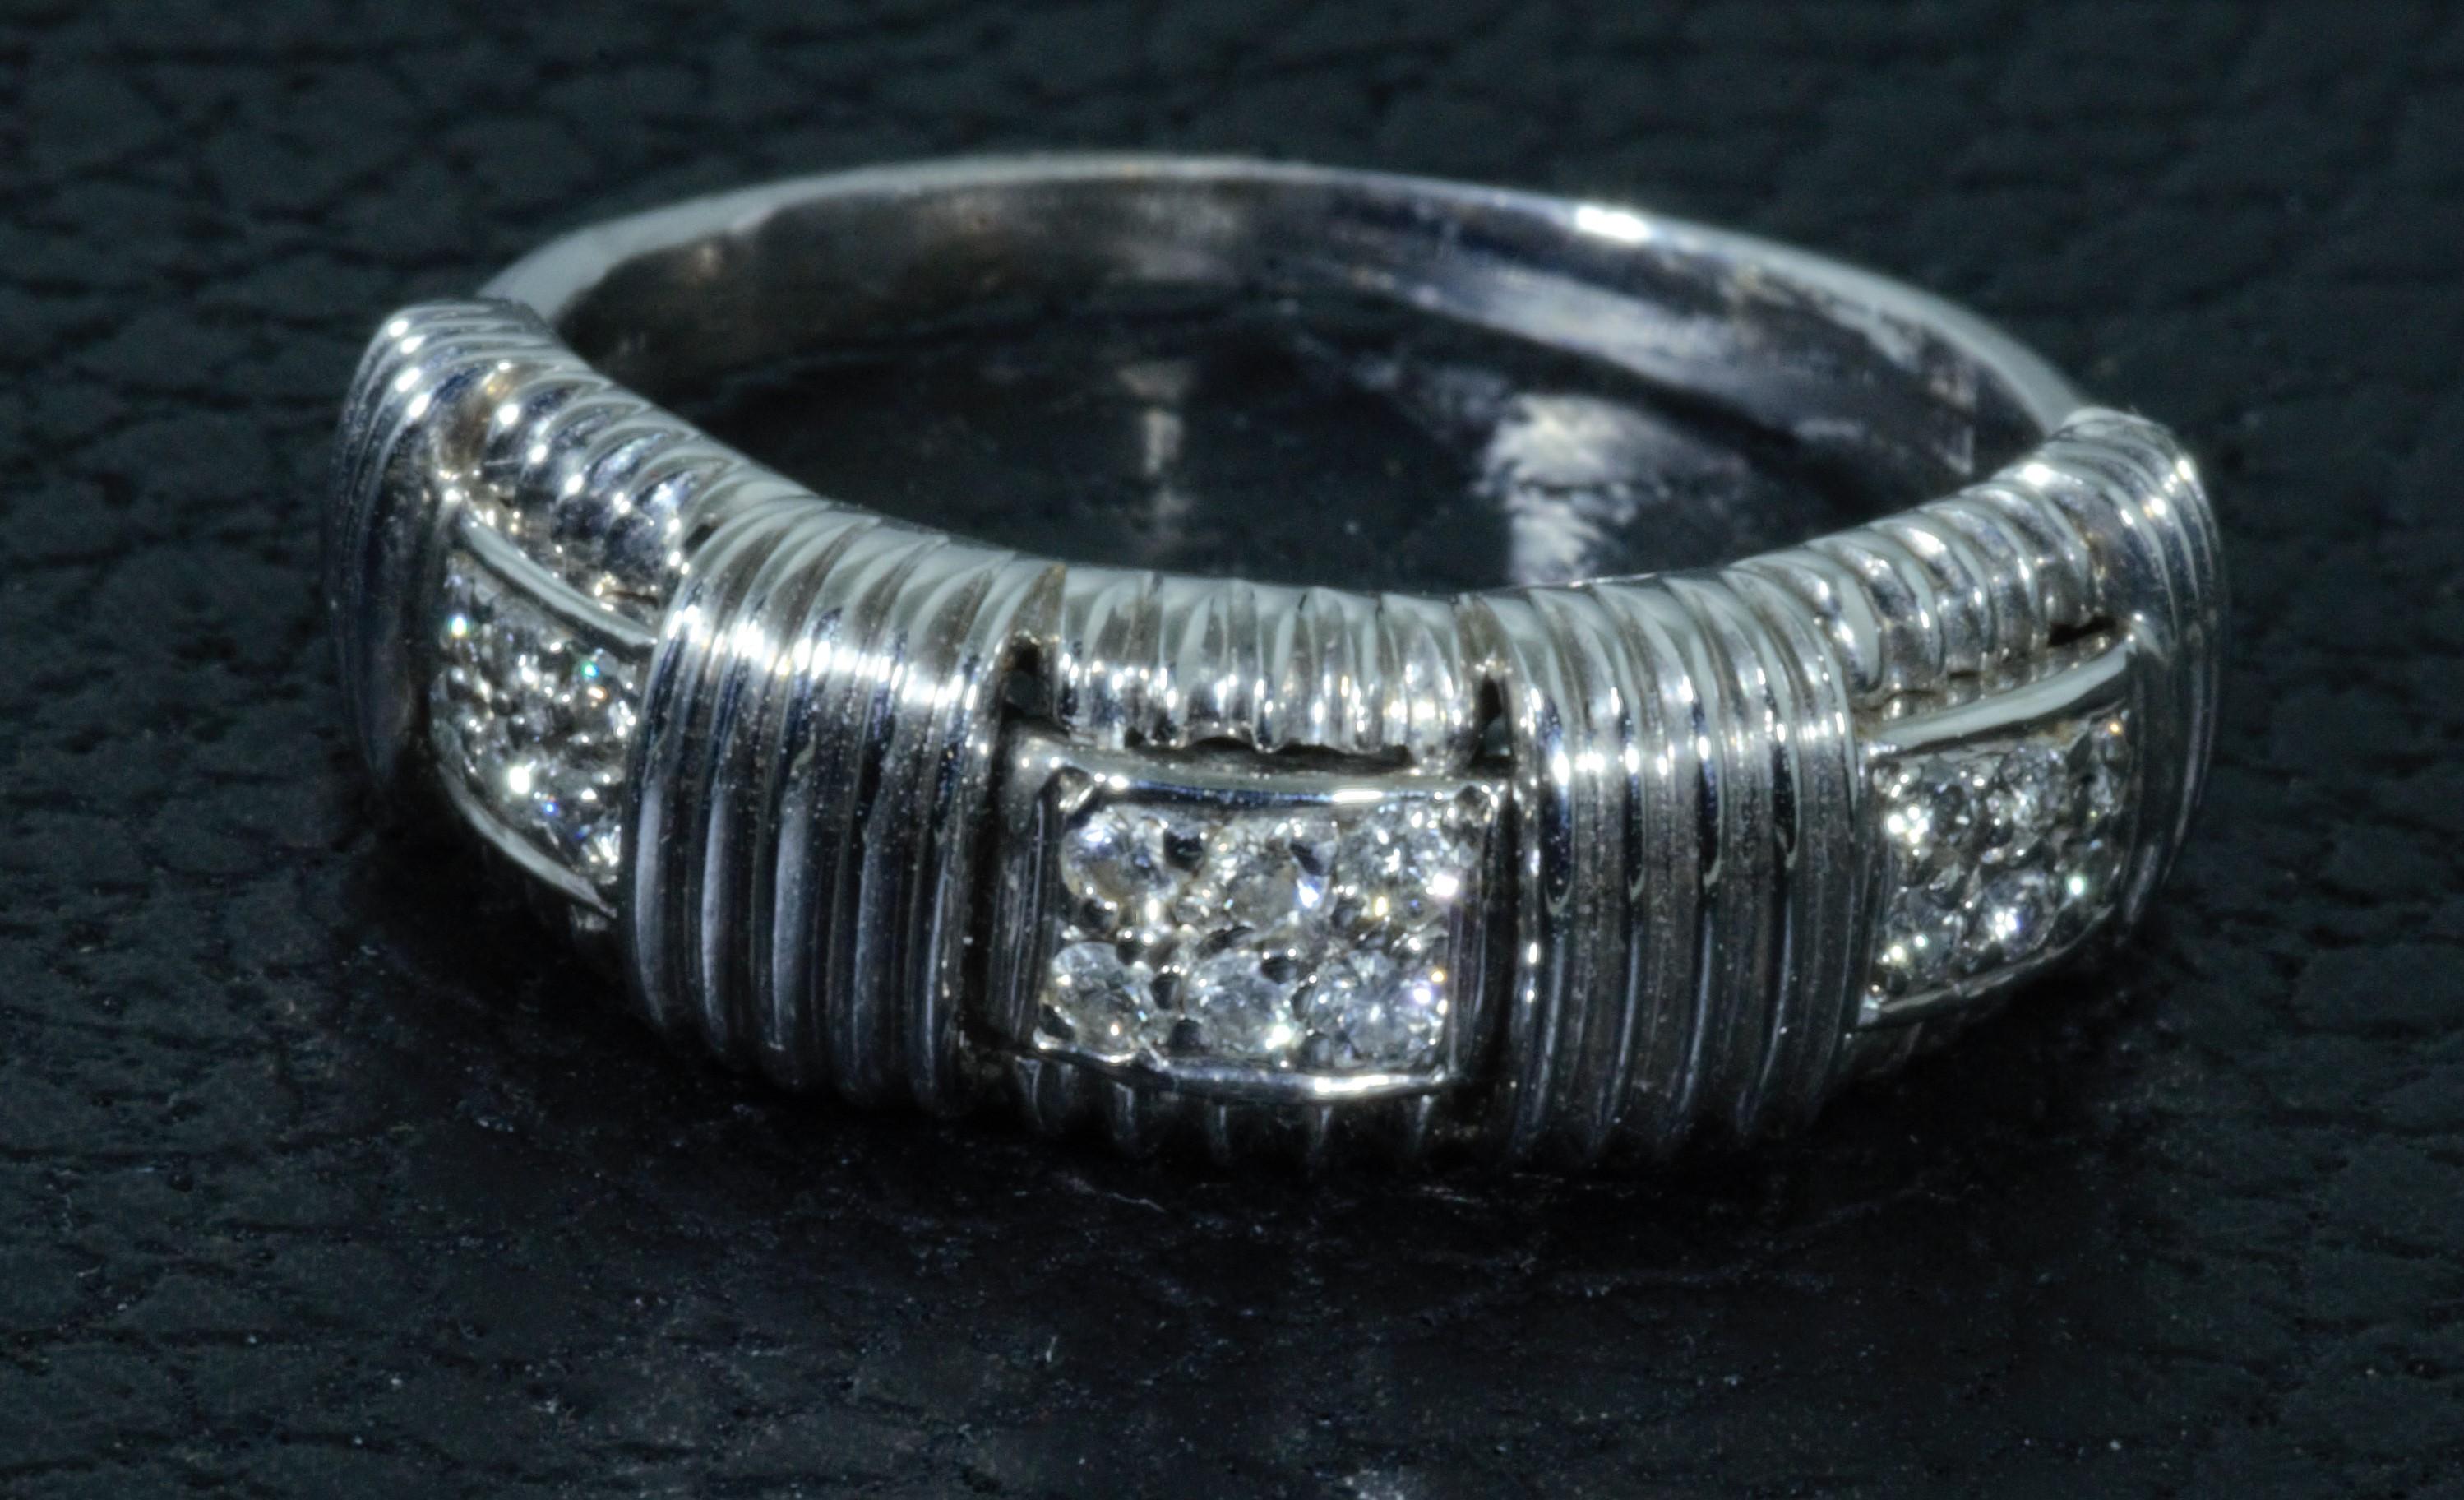 This ring is from the Appassionata collection by Roberto Coin. Crafted in 18kt white gold, a ribbed design provides the perfect backdrop for insets of pave diamond rectangles. This radiant ring from Roberto Coin showcases the designer's passion for